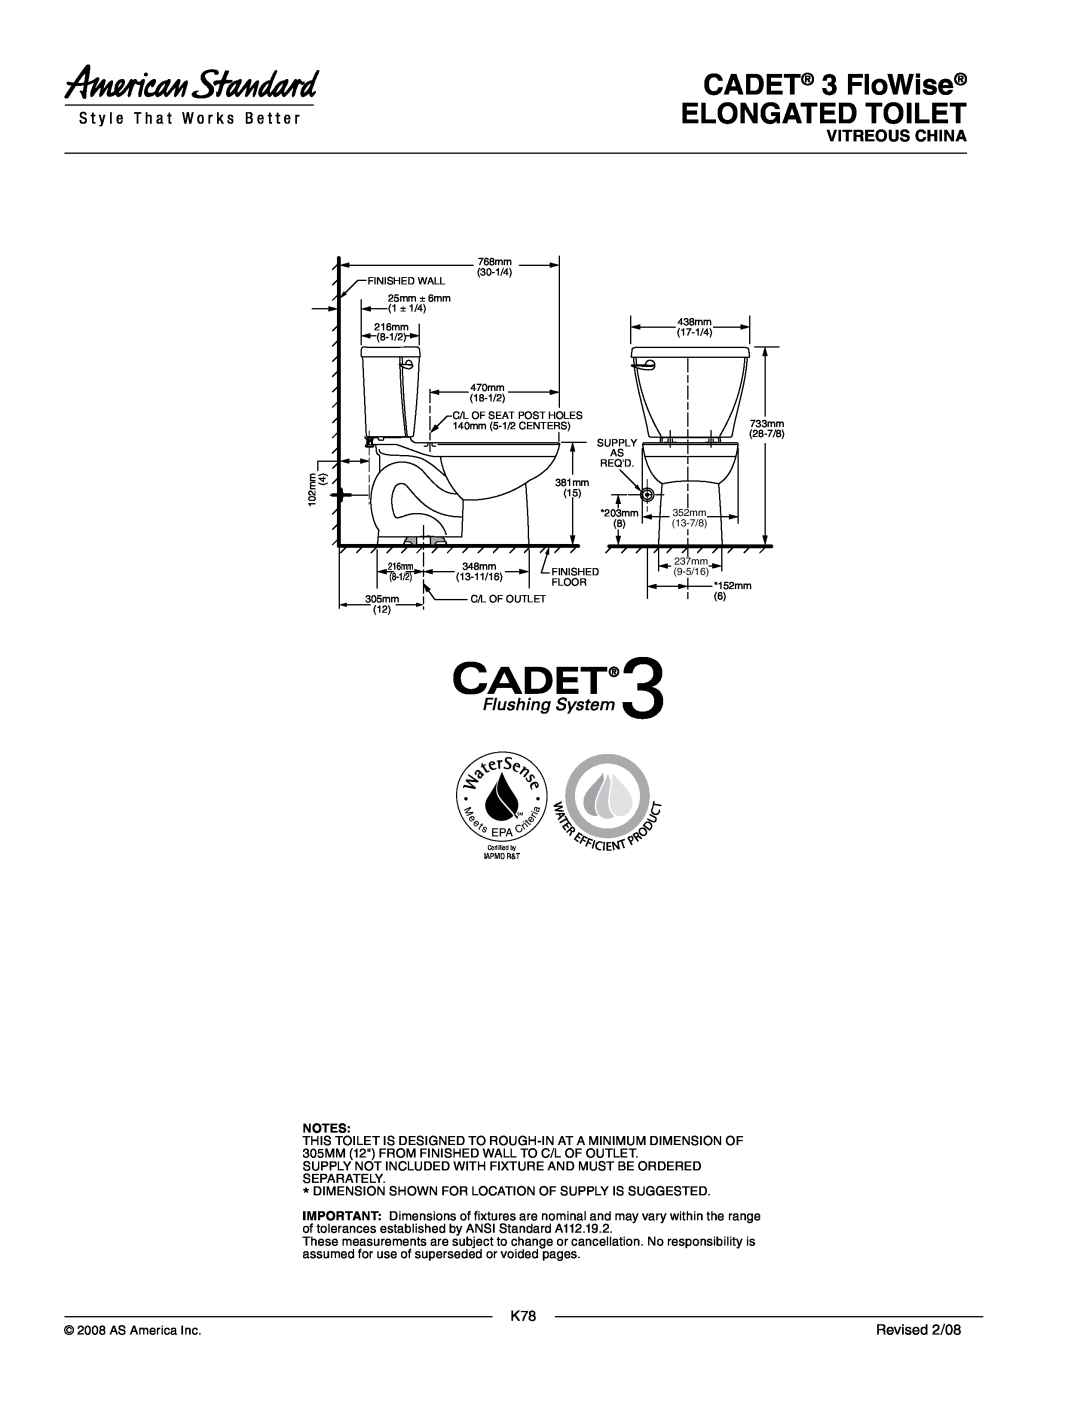 American Standard 2832.128, 4021.613, 4021.513, 3014.128 CADET 3 FloWise ELONGATED TOILET, Vitreous China, Revised 2/08 